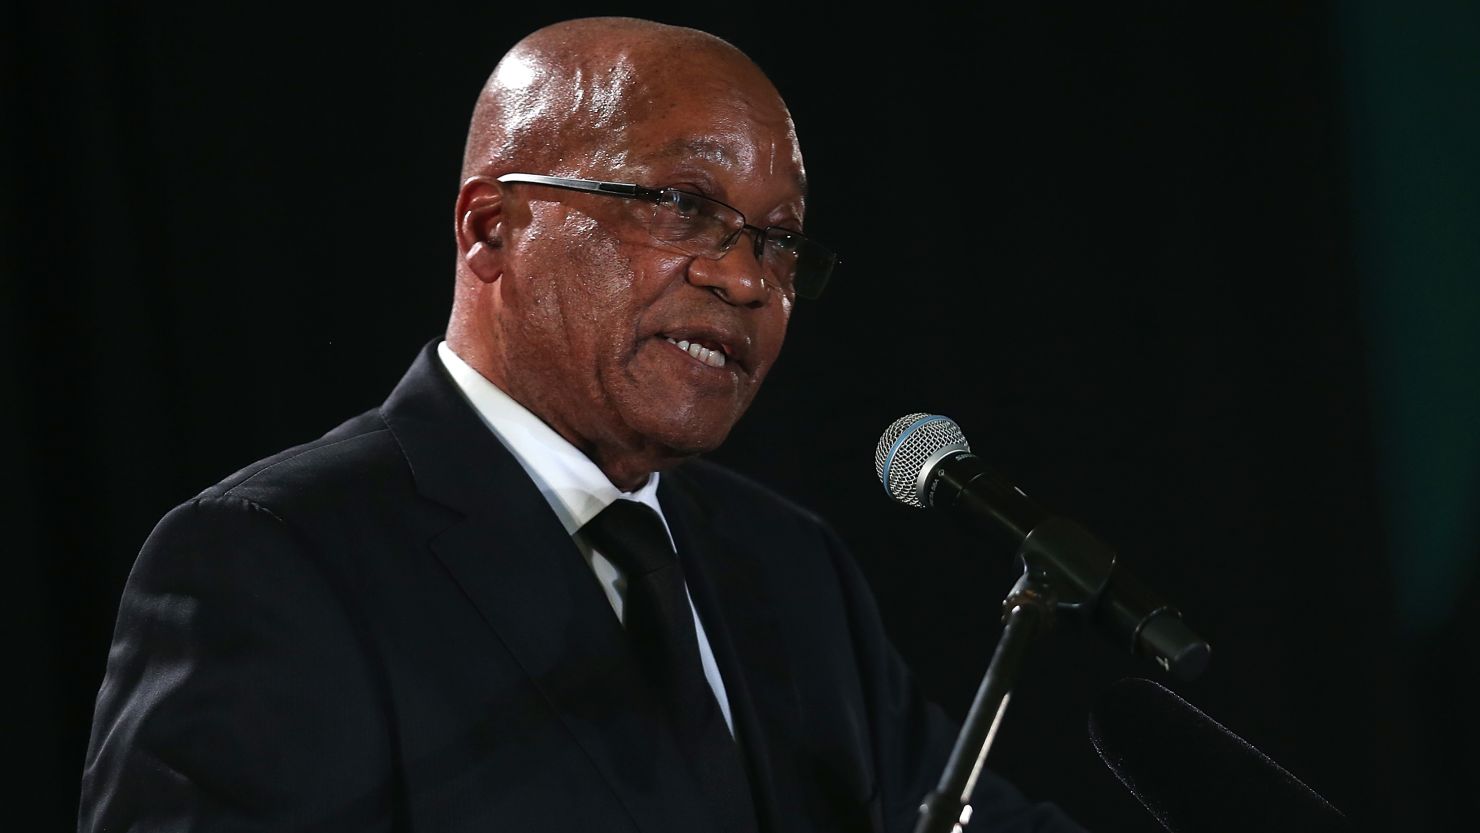 South African President Jacob Zuma speaks in December as part of the ceremonies for Nelson Mandela's funeral.